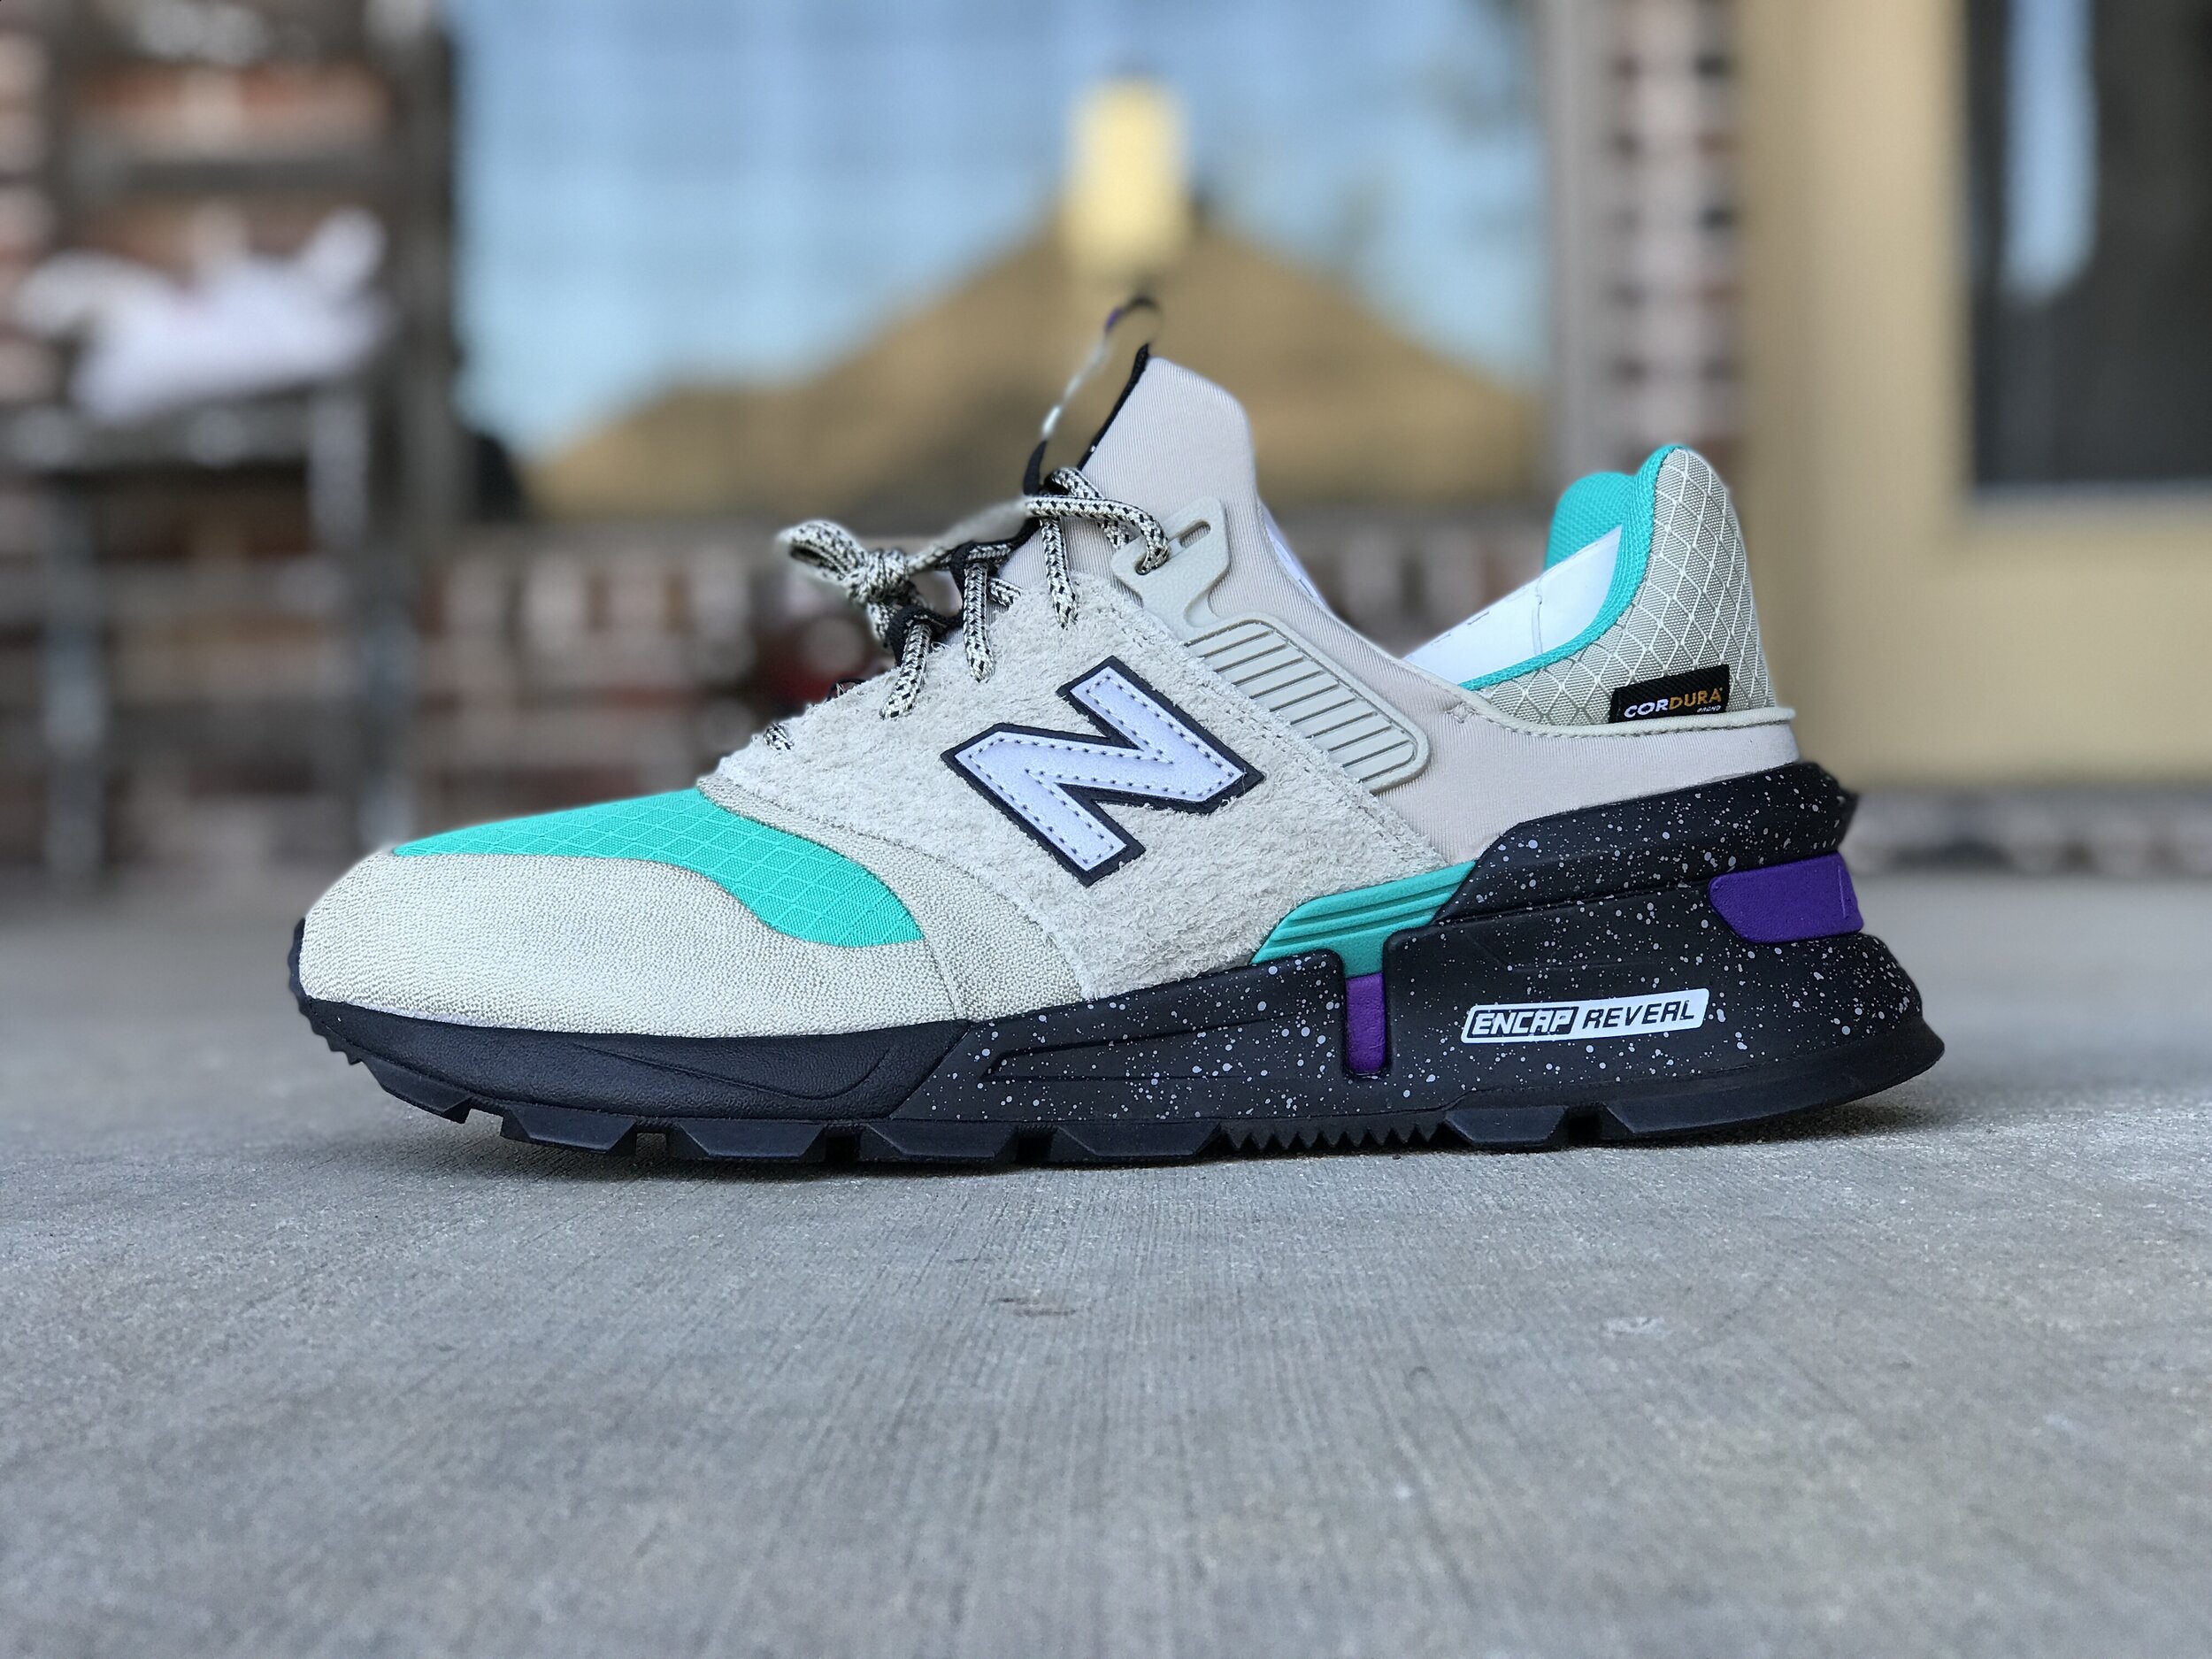 Unboxing The New Balance 997 Sport 